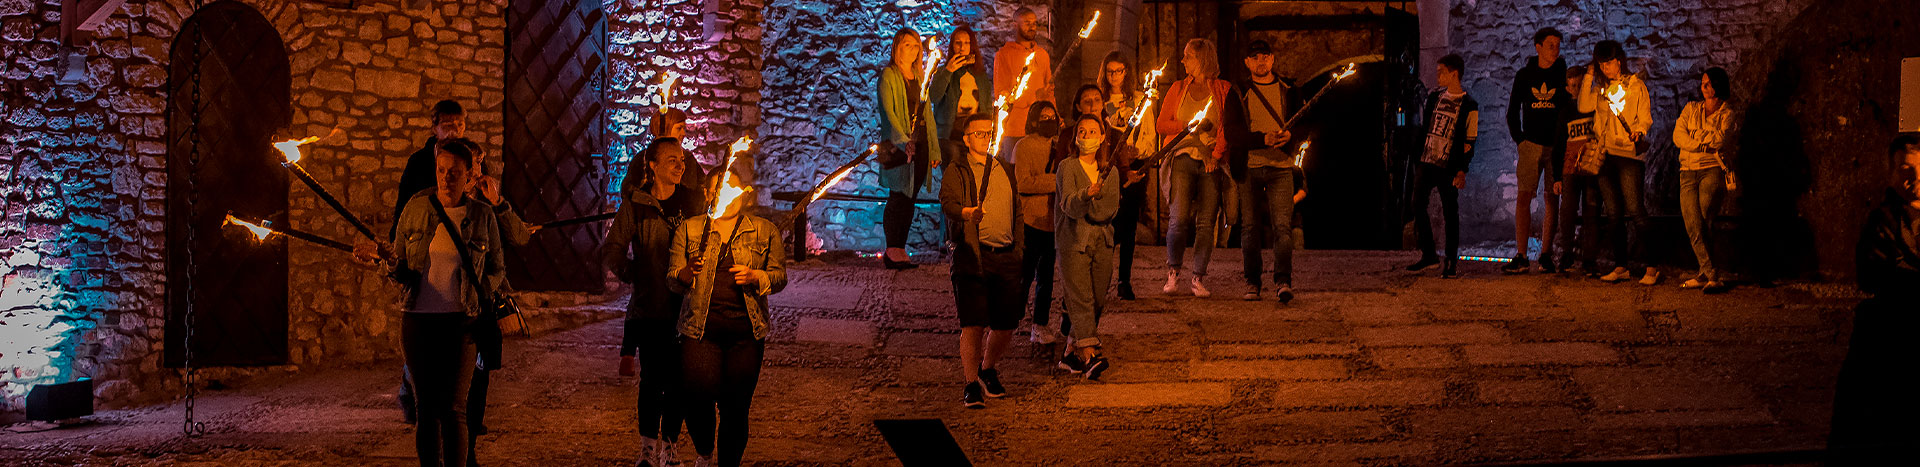 The photograph was taken in the courtyard of the castle in Ogrodzieniec. It presents a night tour. You can see a dozen or so people with torches that illuminate the darkness and fragments of historic walls, including the gates. The photo comes from the archives of the beneficiary.